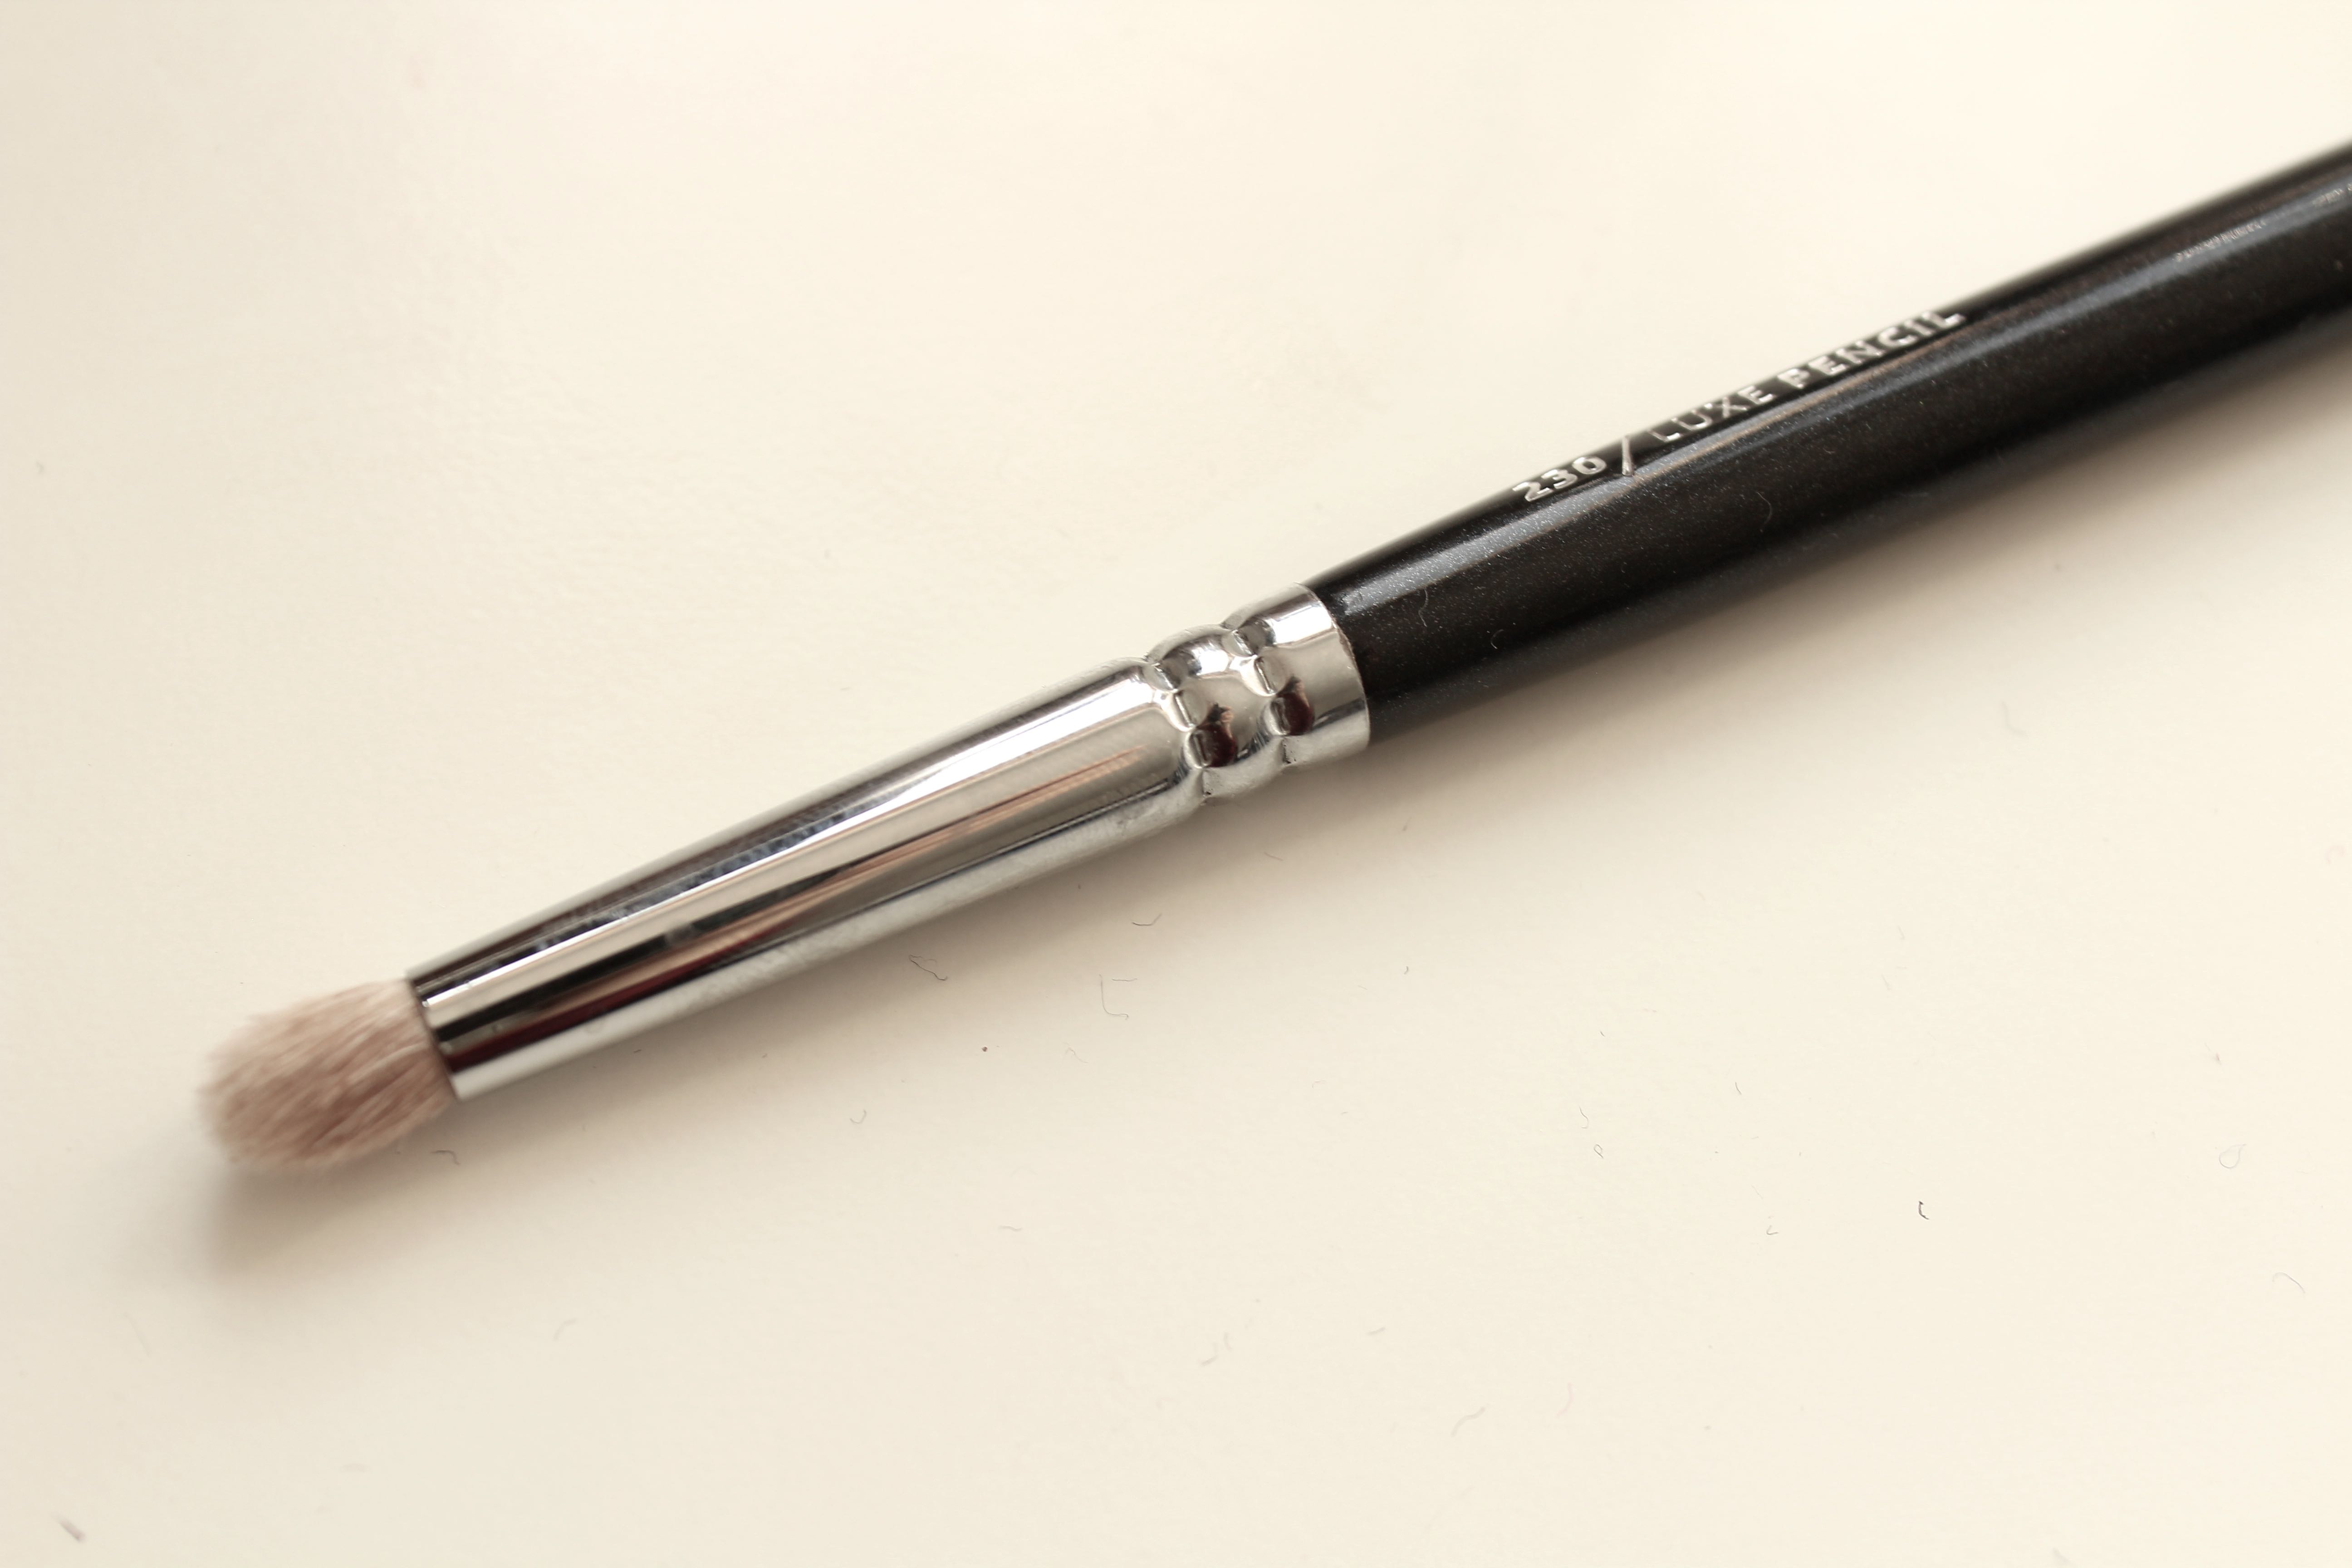 Best 7 Makeup Brushes for Smaller Eyes - Zoeva 230 Pencil Brush by Face Made up